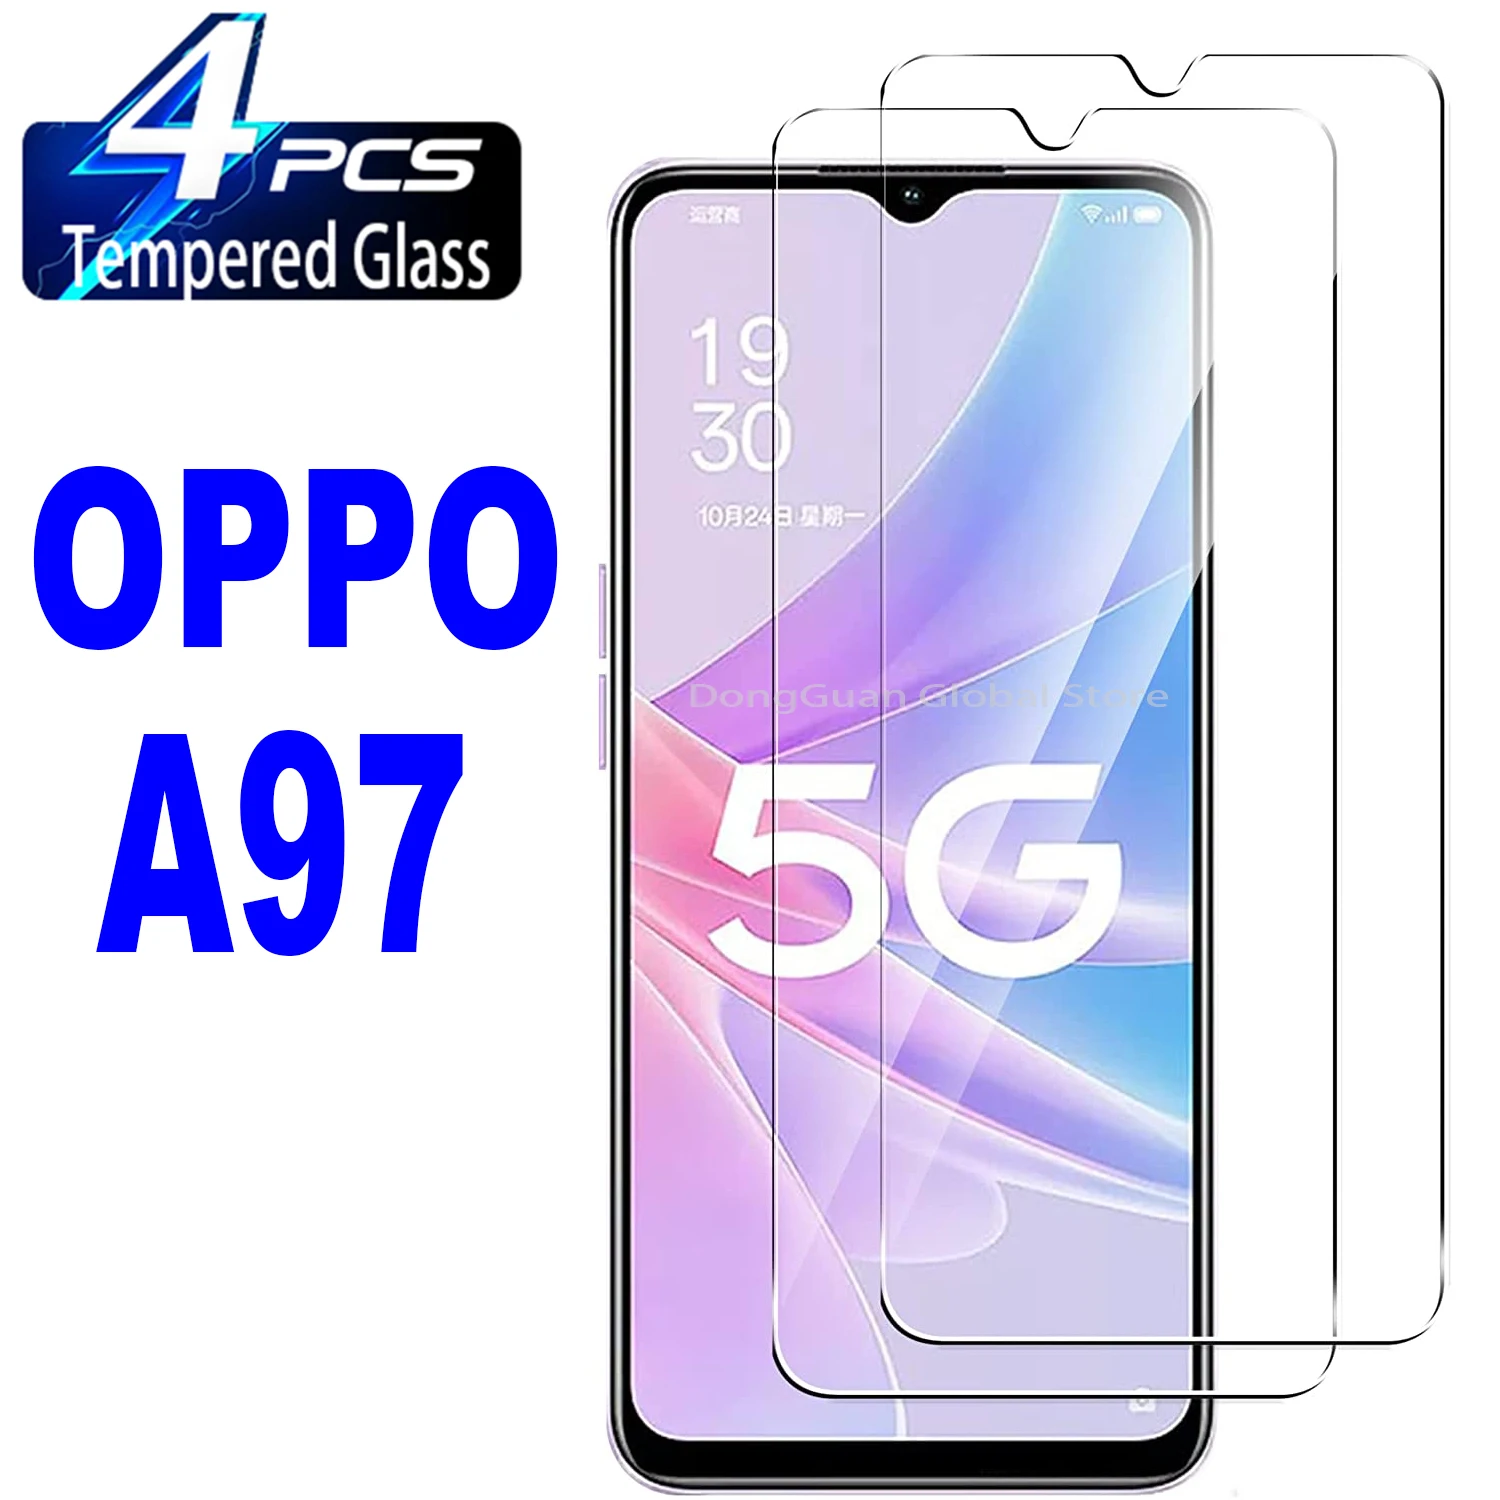 2/4Pcs Tempered Glass For OPPO A97 Screen Protector Glass Film hydrogel film for oppo reno 2 z f screen protector for oppo reno z 2z 2 2f ace screen protector oppo reno ace 2f 2z cover film